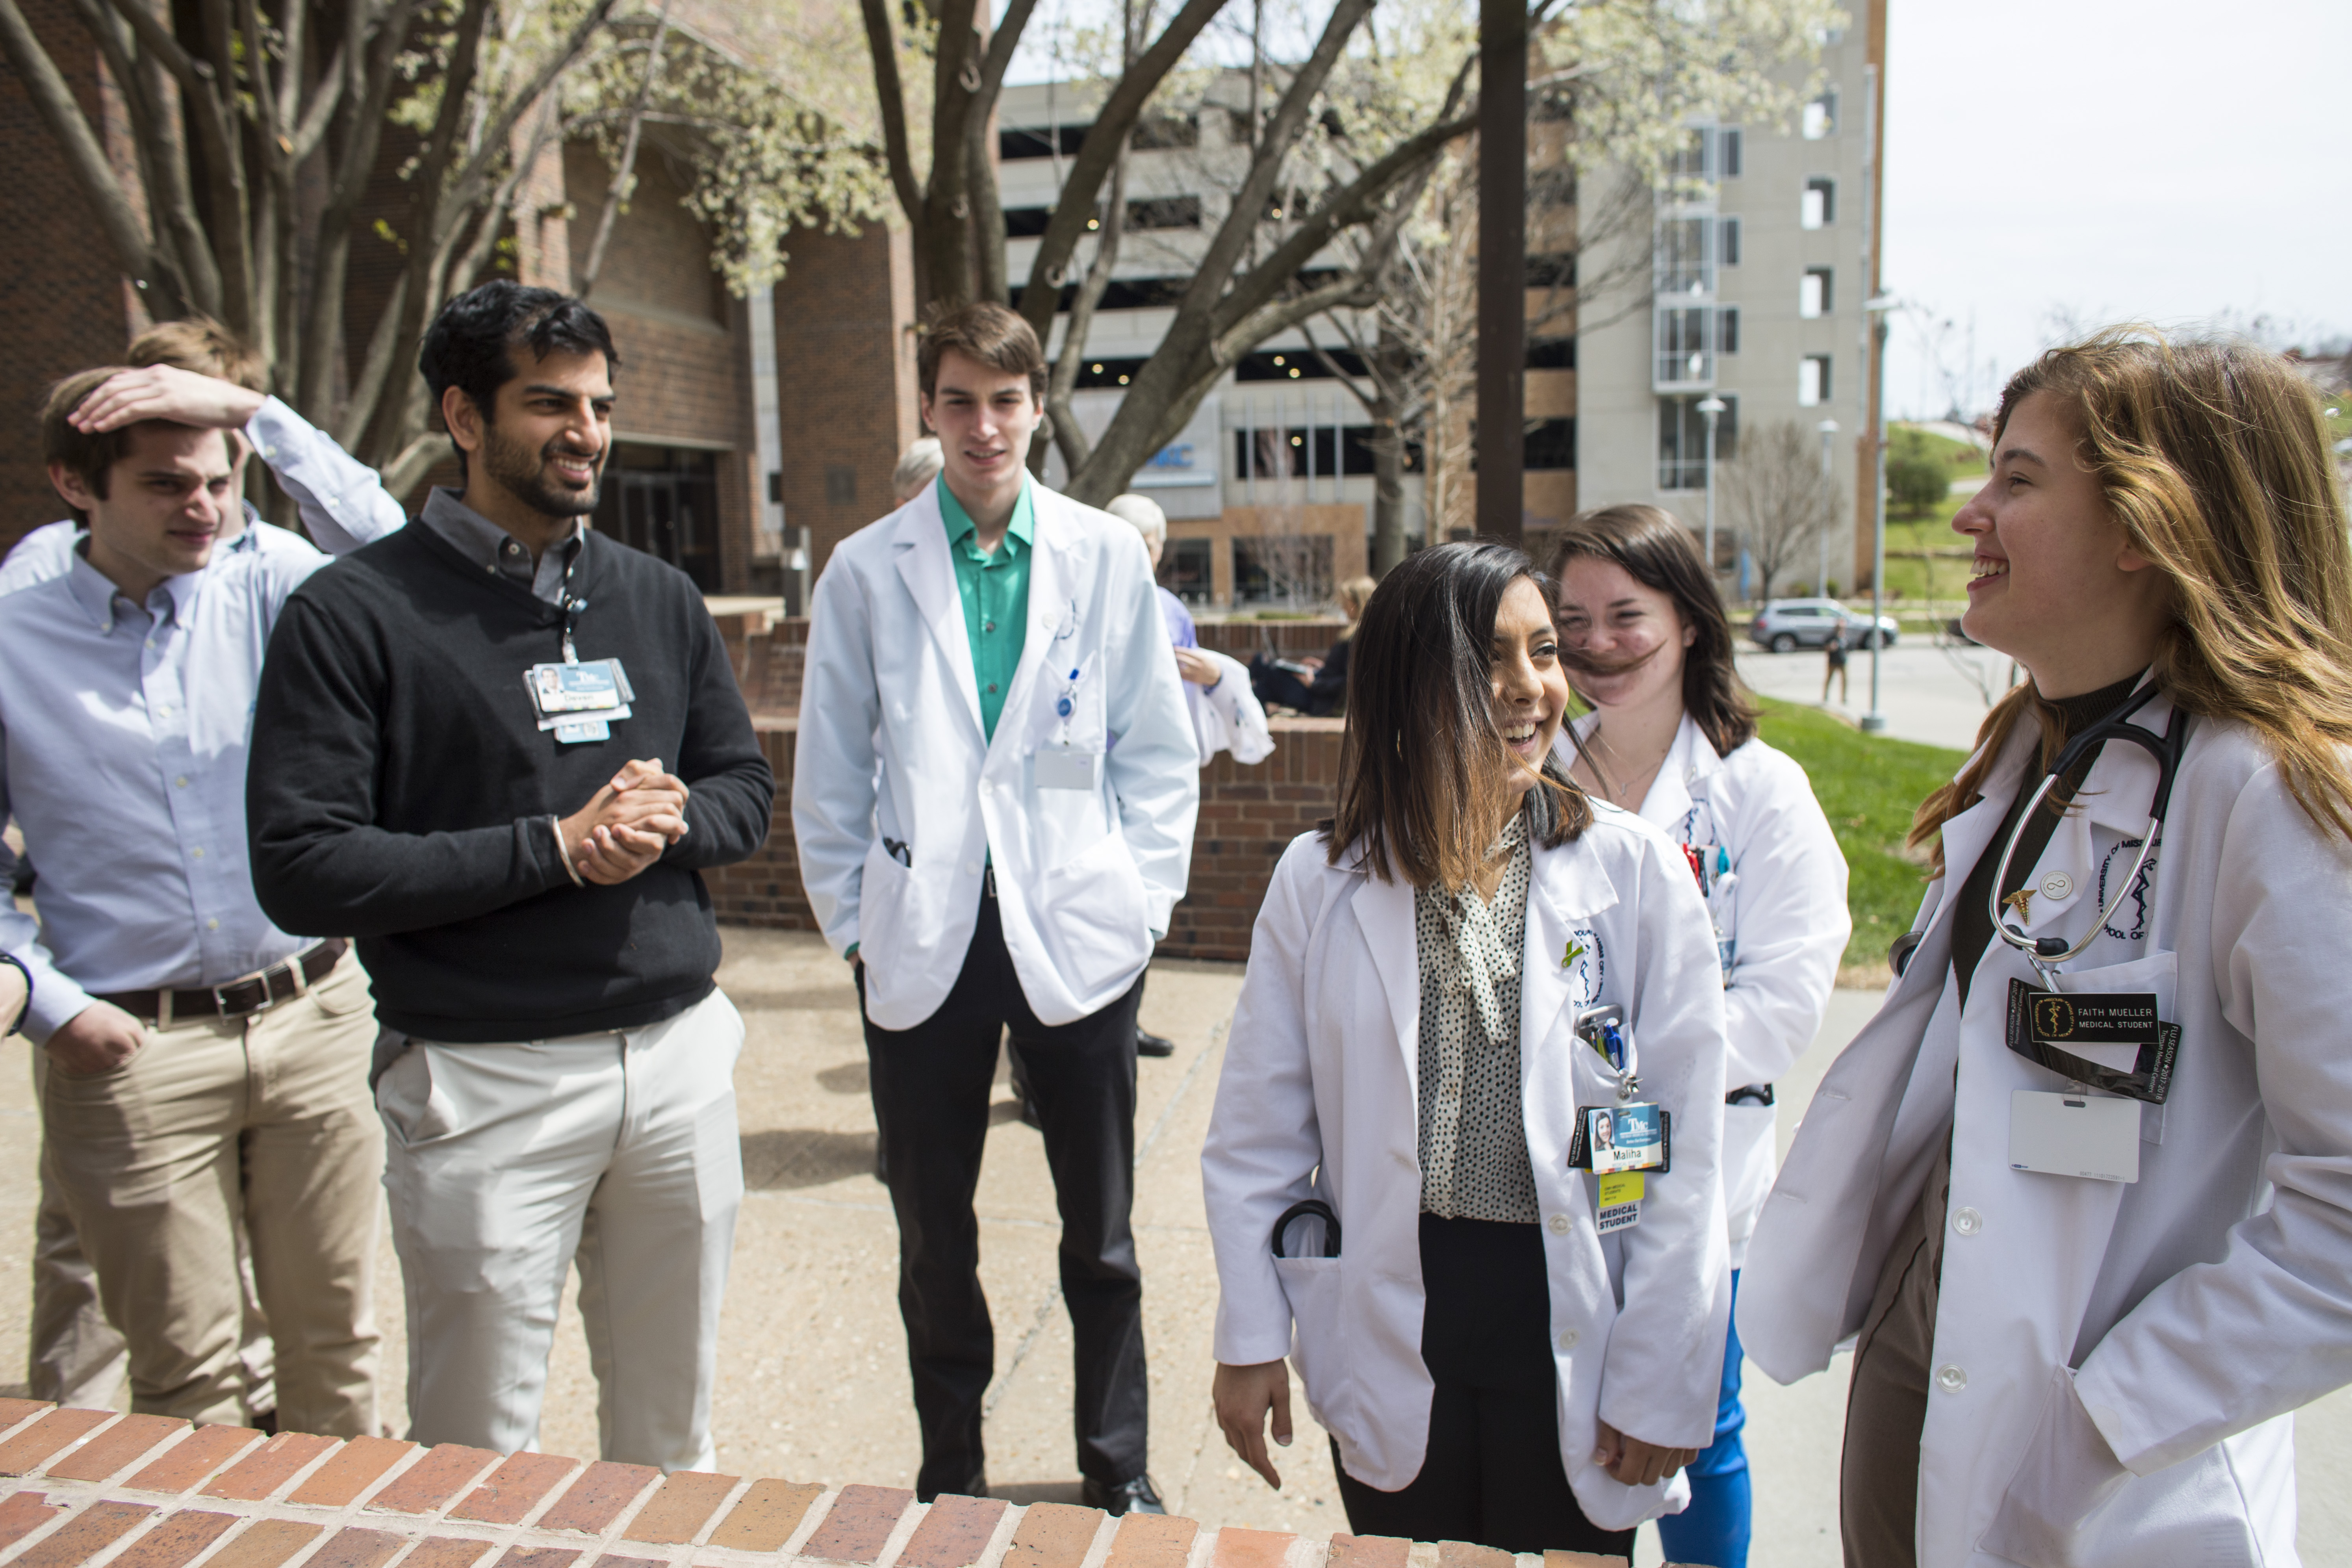 Students gathered in outdoor courtyard at UMKC School of Medicine